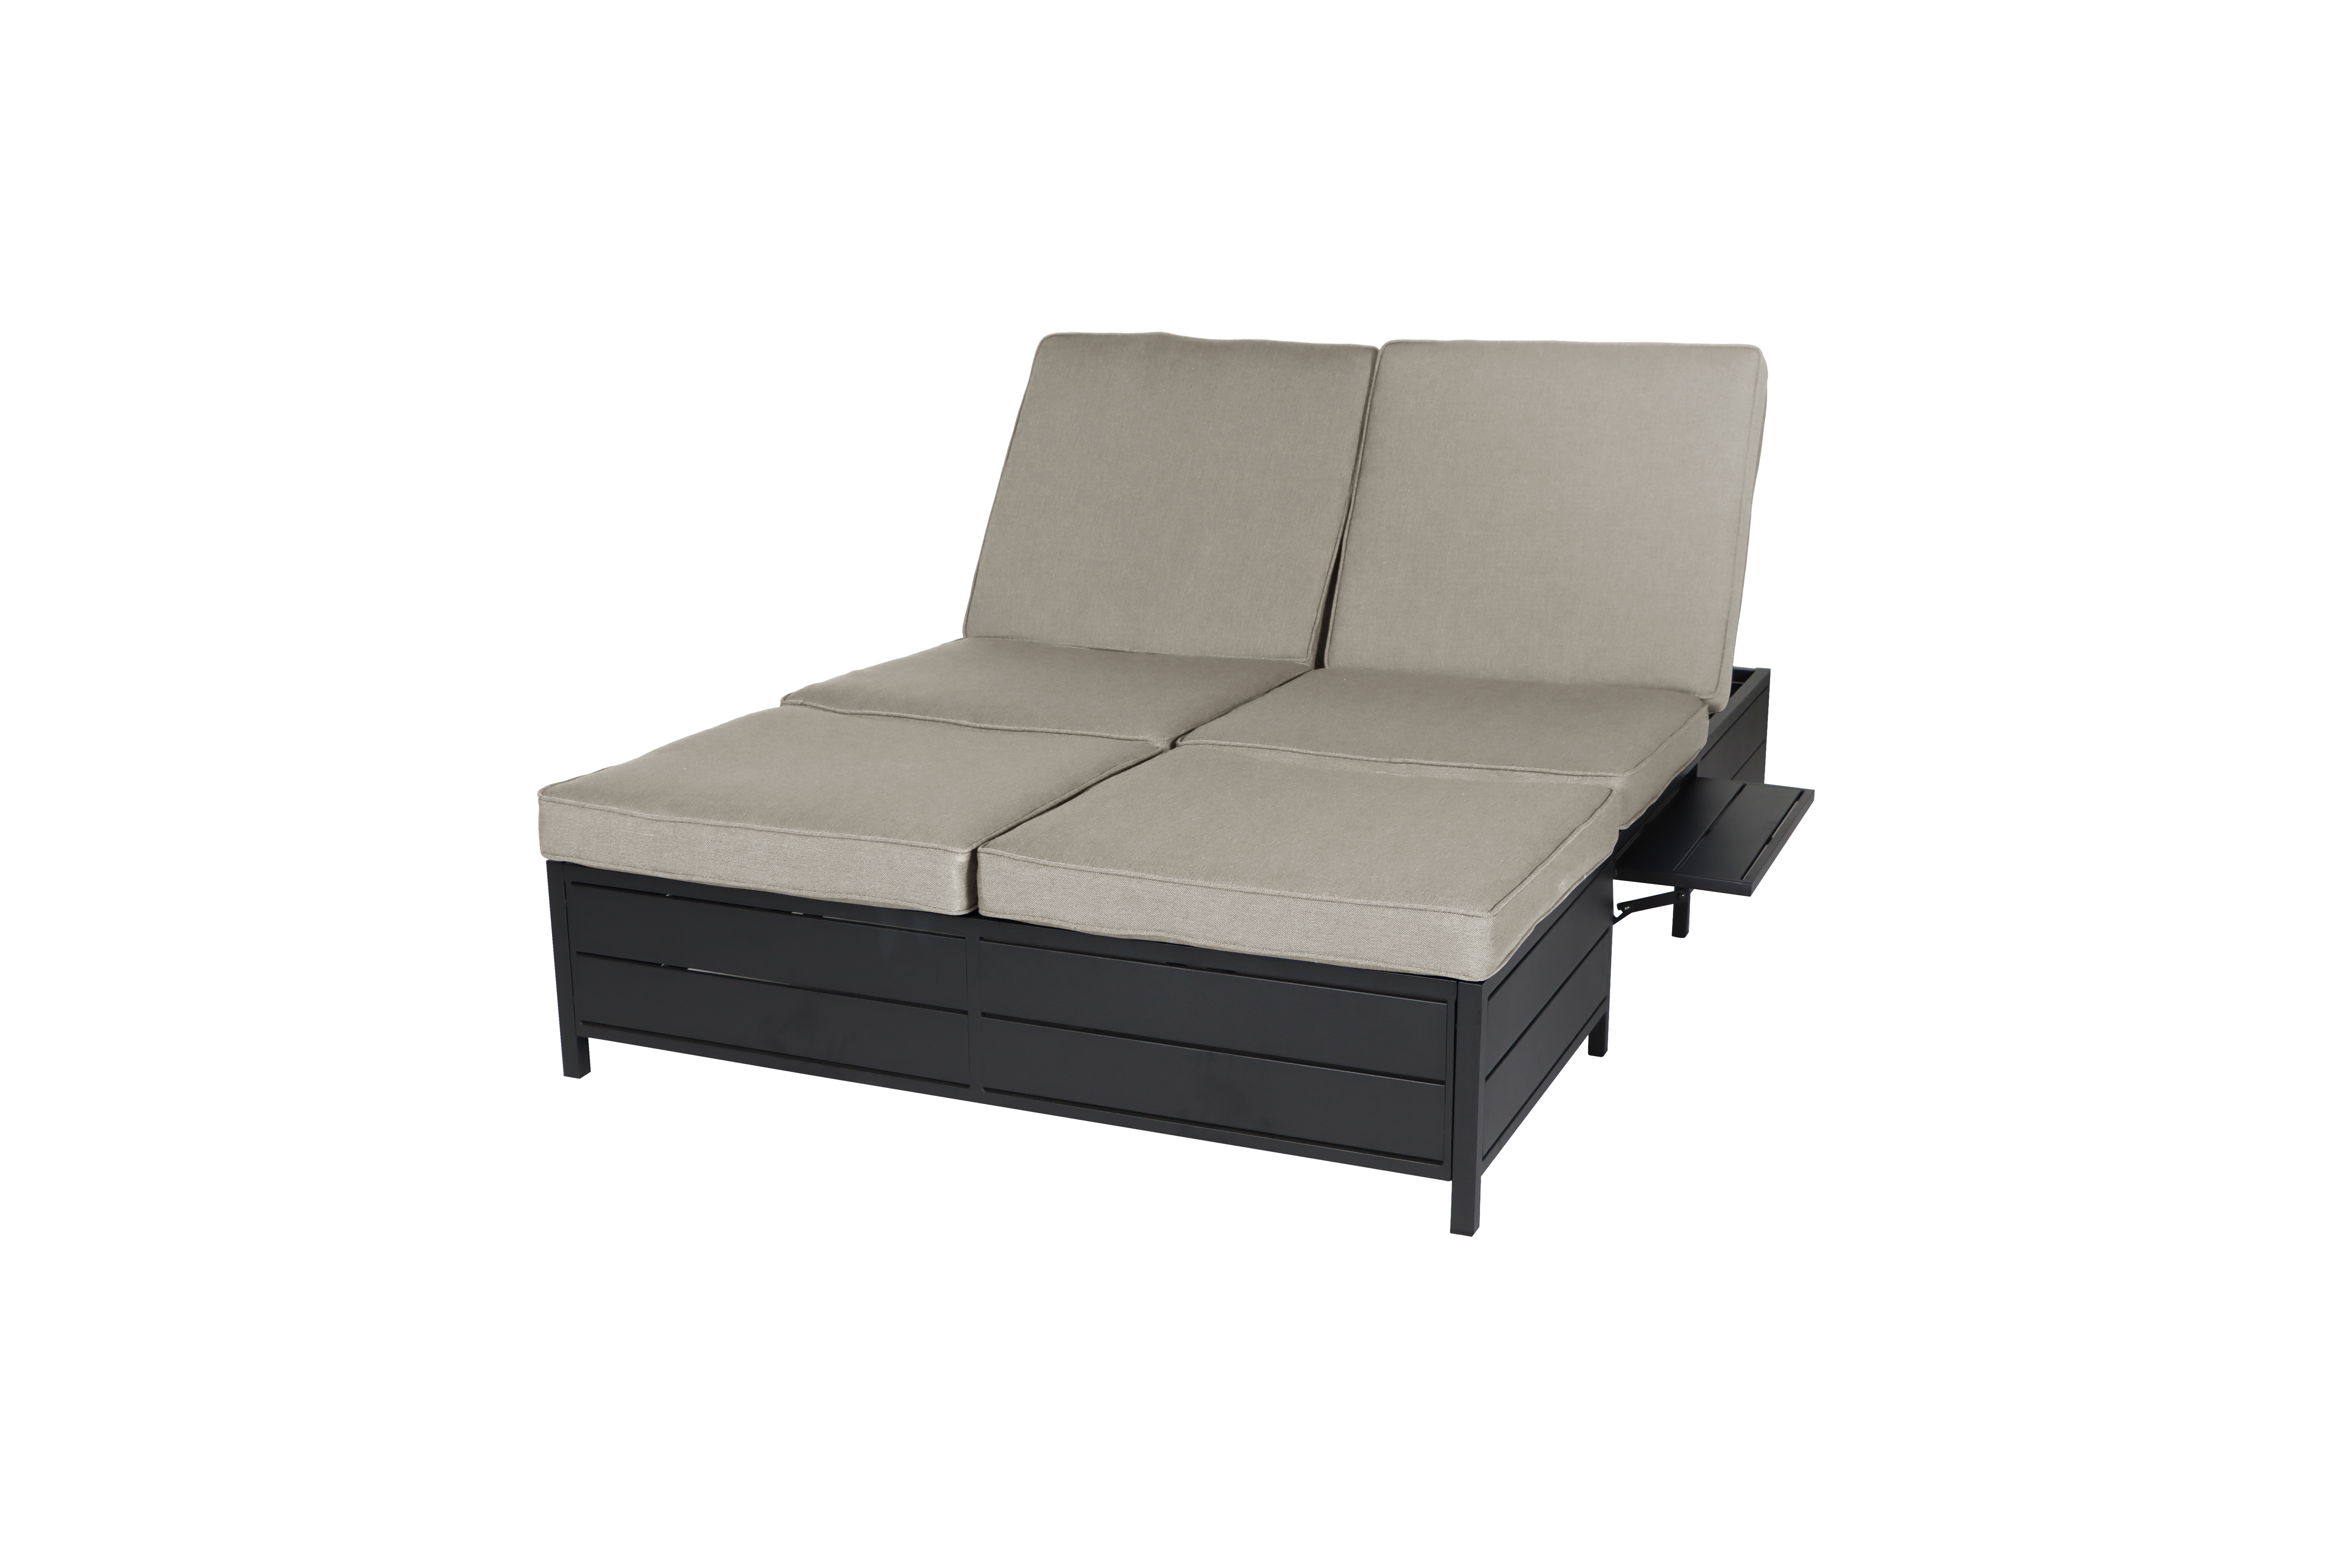 Mainstays Cushion Steel Outdoor Chaise Lounge - Tan/Black - image 3 of 5